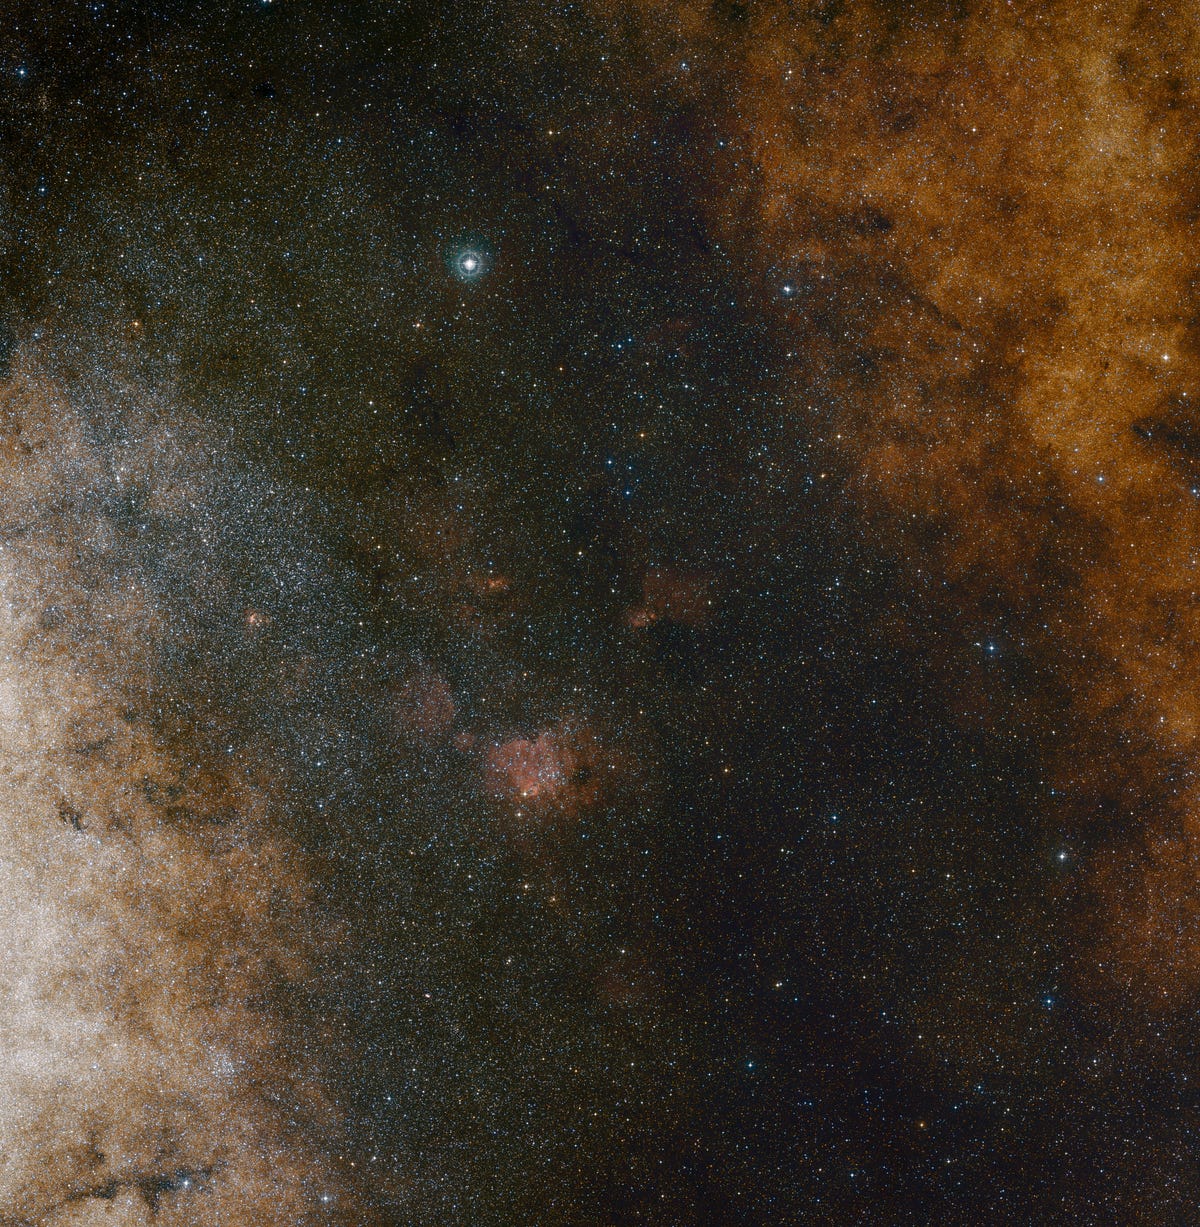 A darker color scheme with navy blue, dark gray and burnt orange shows a starry view of our Milky Way's core from a side angle.